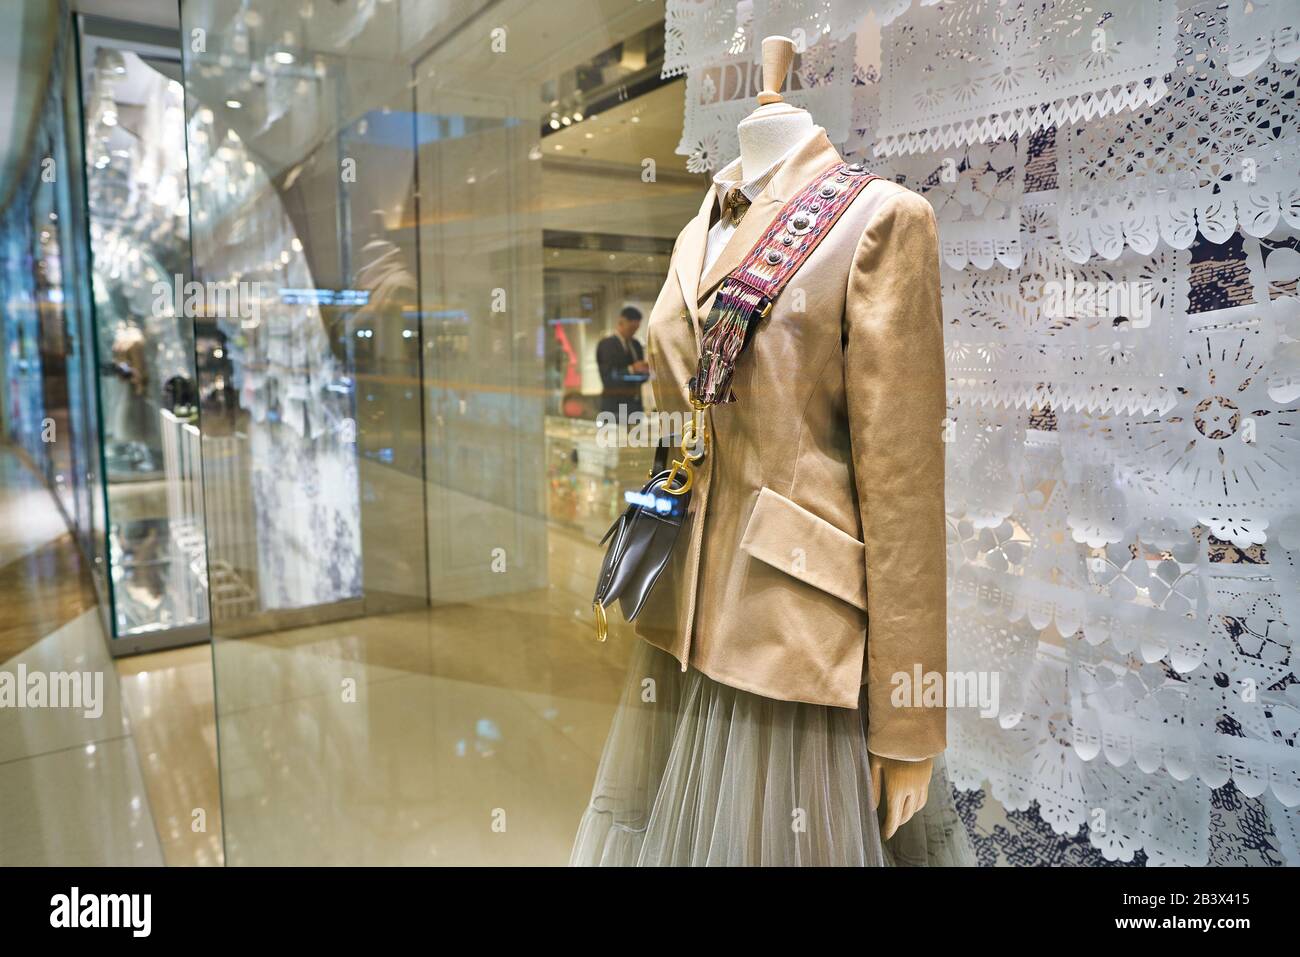 Shoppers reflected in a Dior window display near a Gucci store at